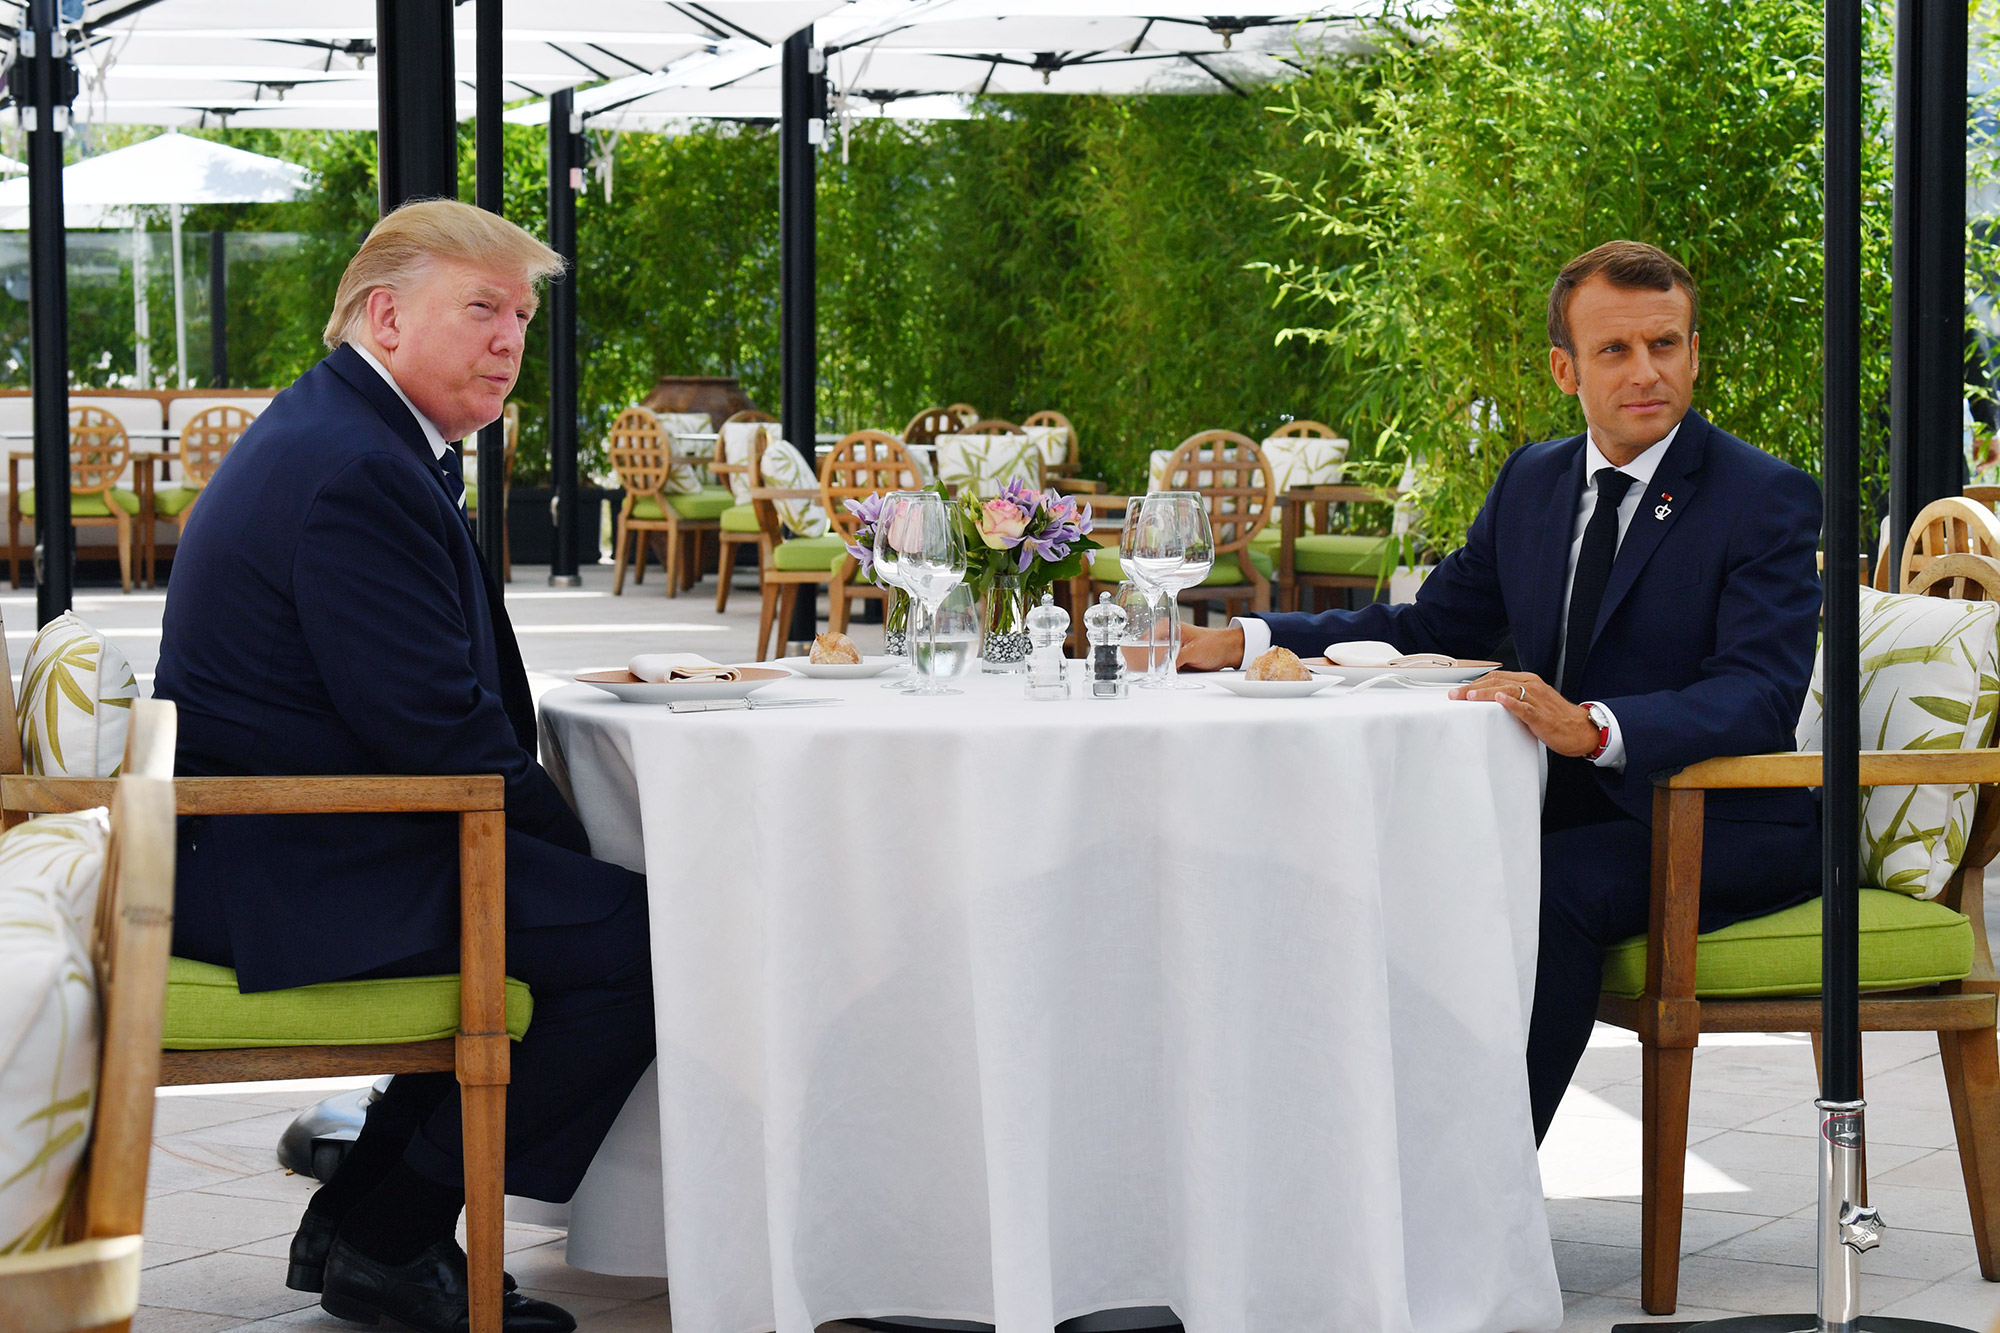 President Trump sits to lunch with President Macron at the Hotel du Palais in Biarritz on Saturday.